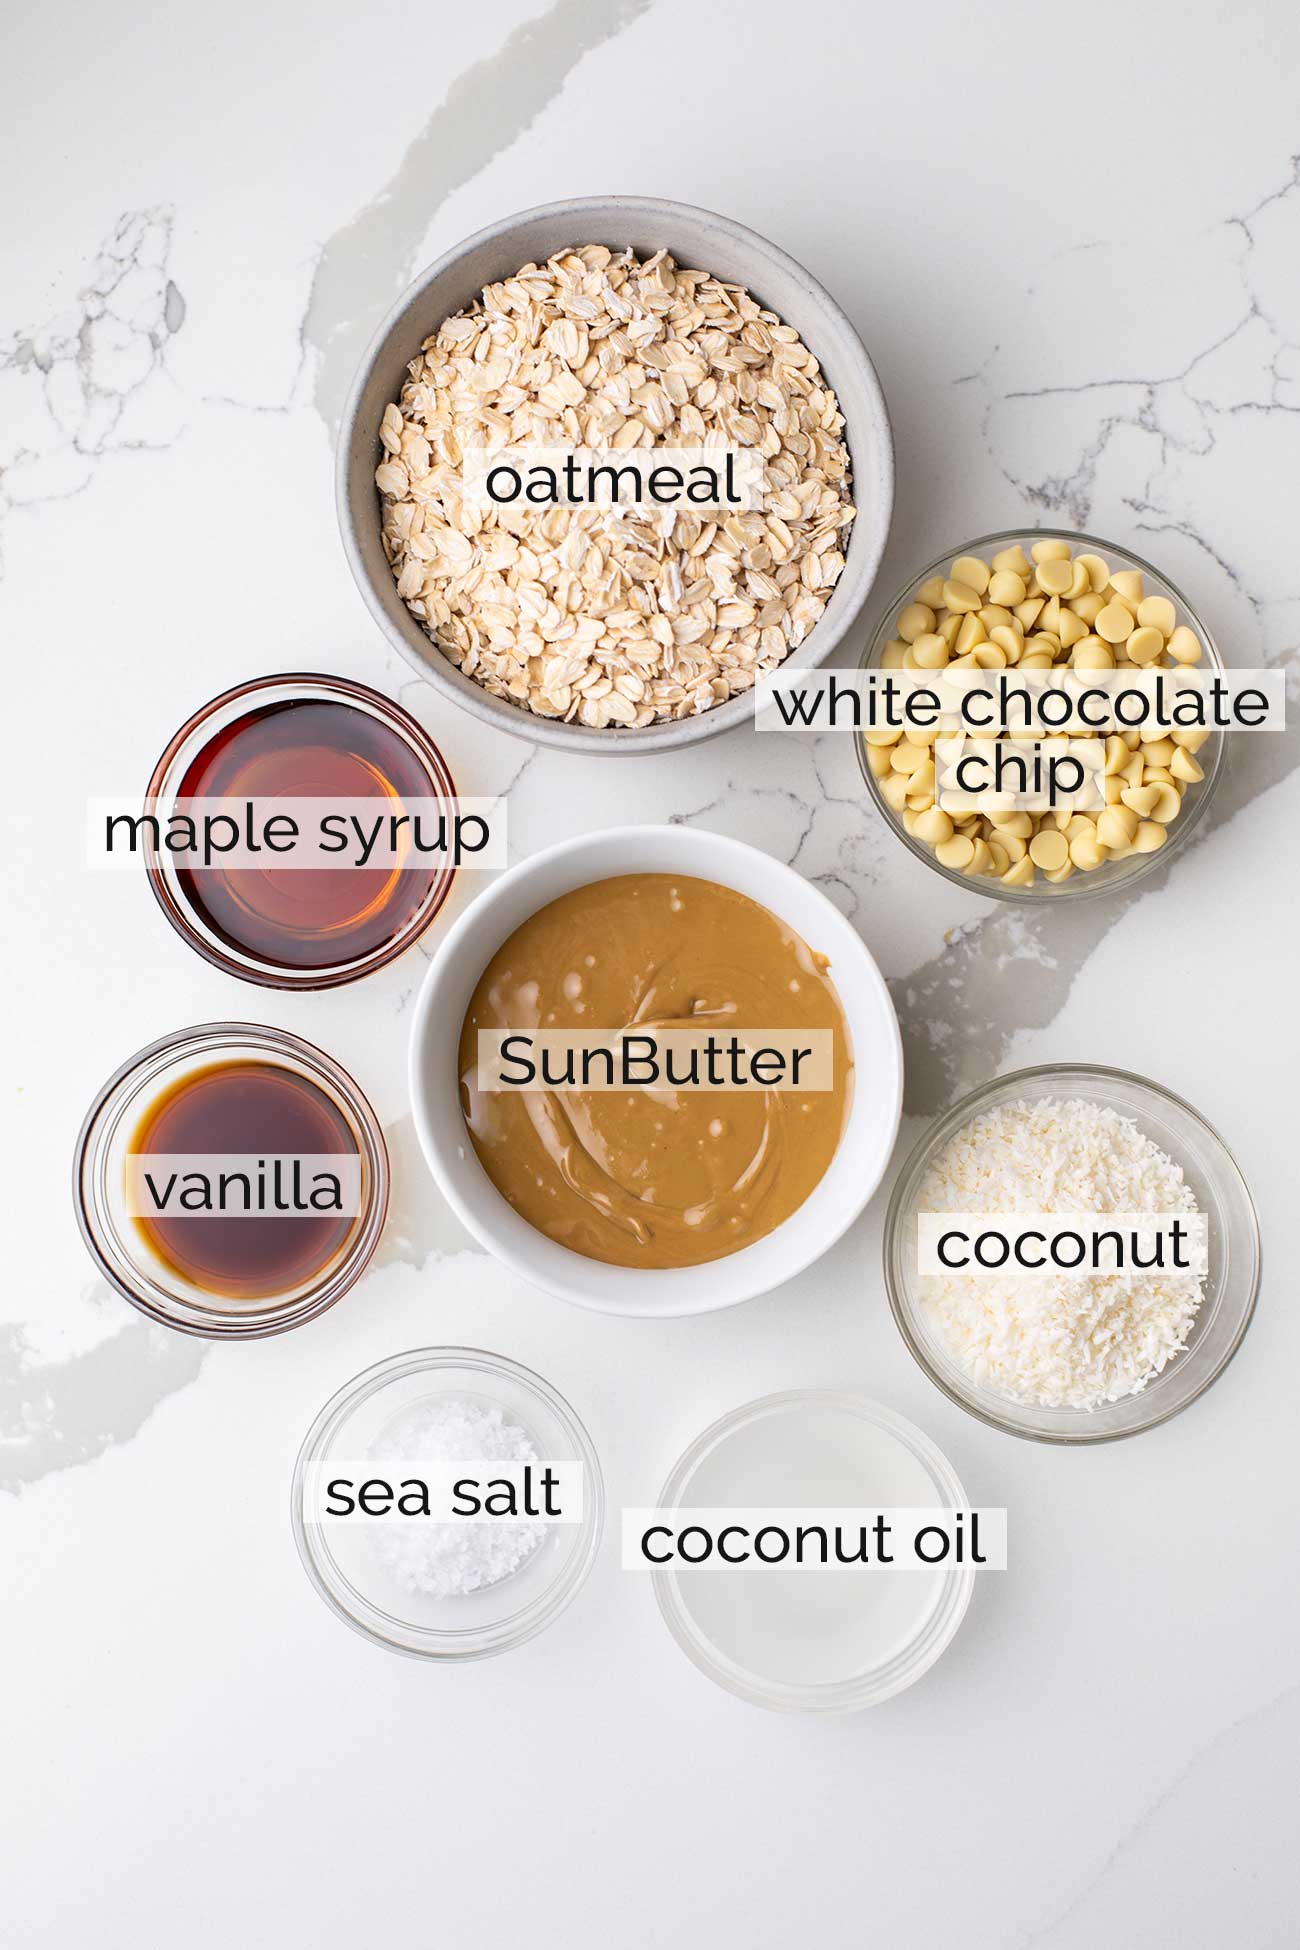 The ingredients needed to make caramel no bake cookies.